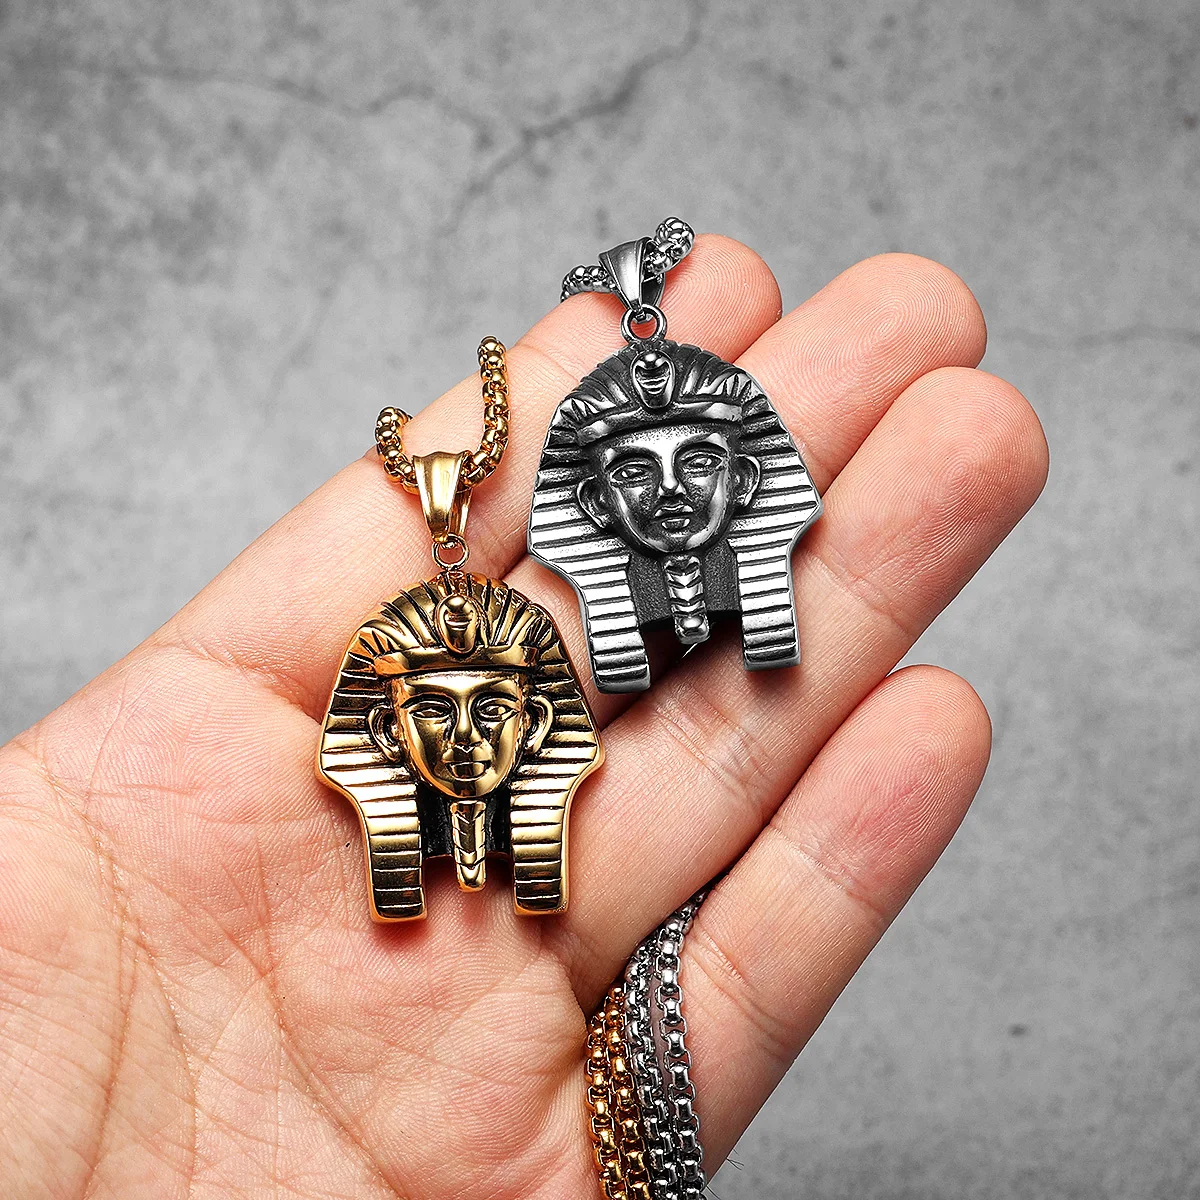 Egypt Pharaoh Sphinx Stainless Steel Men Necklaces Pendant Chain Powerful Amulet Cool Things For Women Jewelry Gift Wholesale